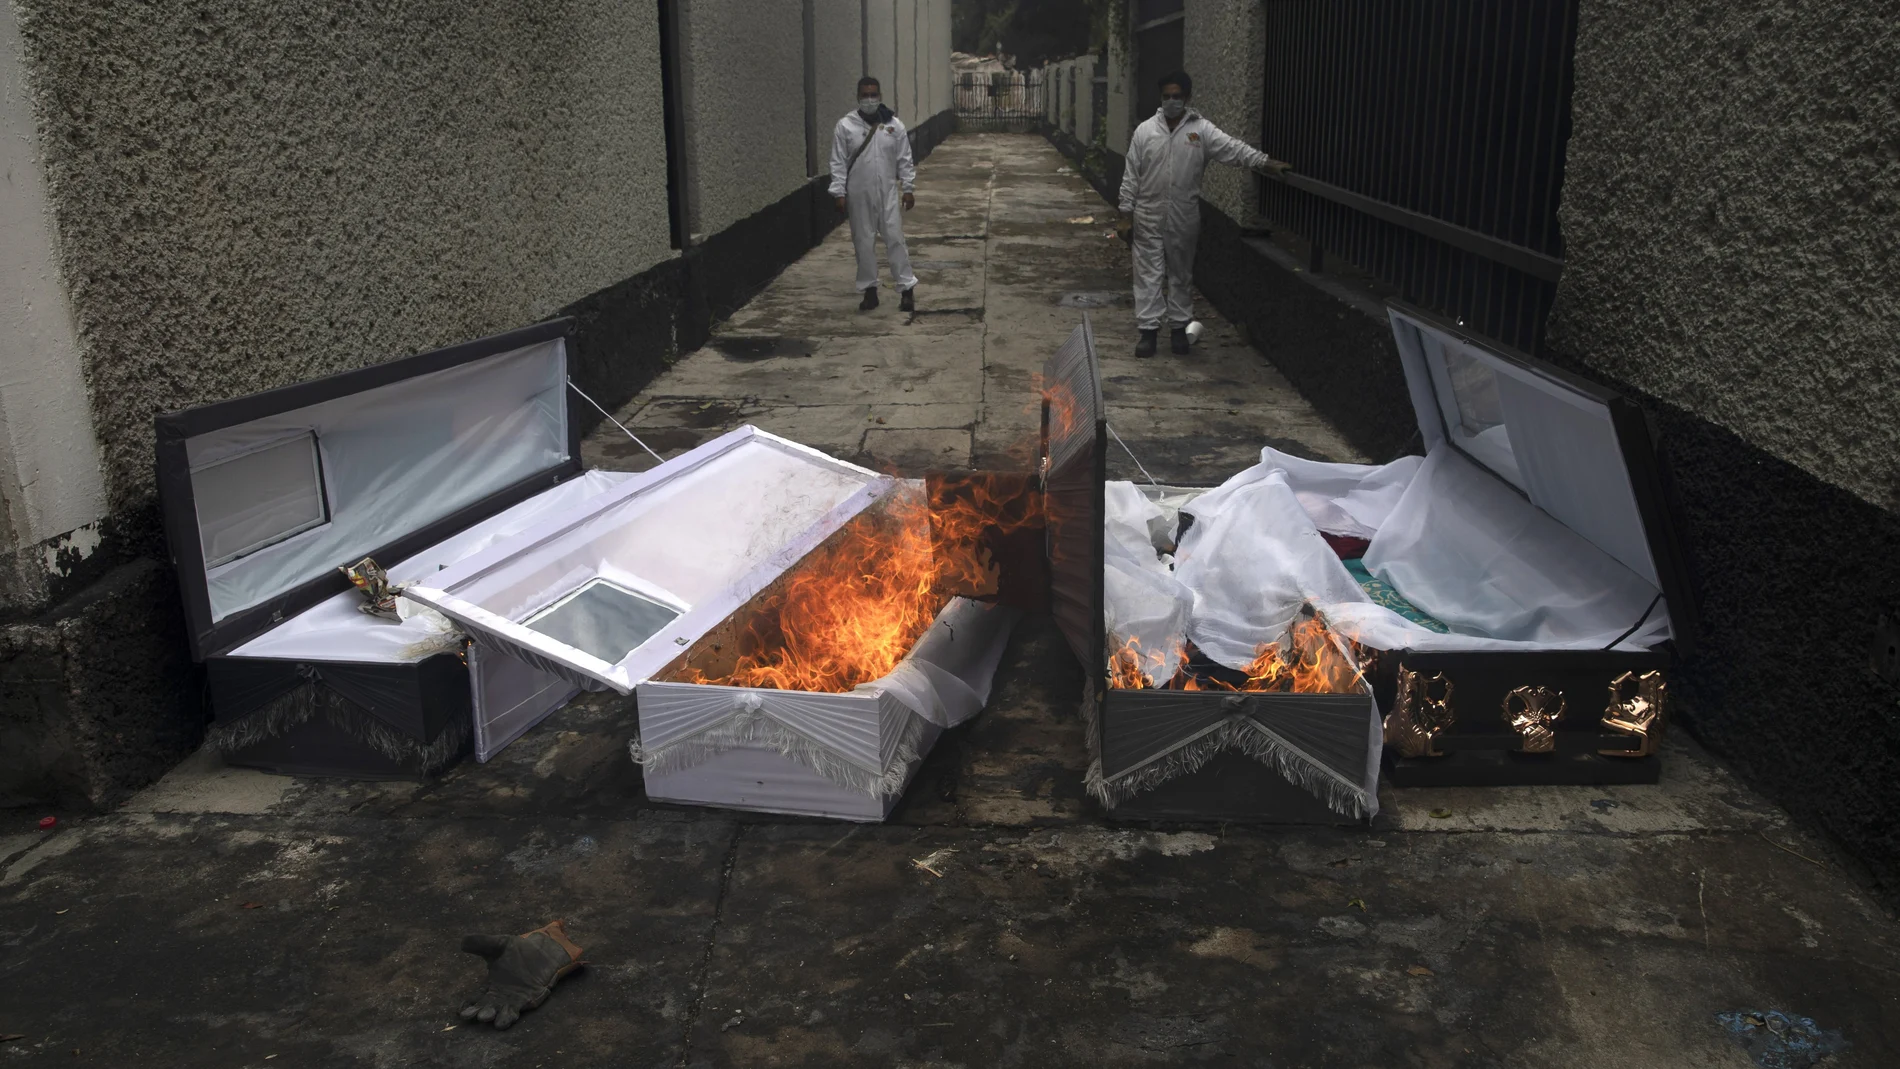 FILE - In this June 24, 2020 file photo, crematorium workers burn the coffins that contained the remains of people who died from the coronavirus after their cremation at the San Nicolas Tolentino cemetery in the Iztapalapa neighborhood of Mexico City. As Mexico approaches 200,000 in officially test-confirmed deaths from COVID-19, the real death toll is probably higher due to the countryâ€™s extremely low rate of testing. (AP Photo/Marco Ugarte, File)